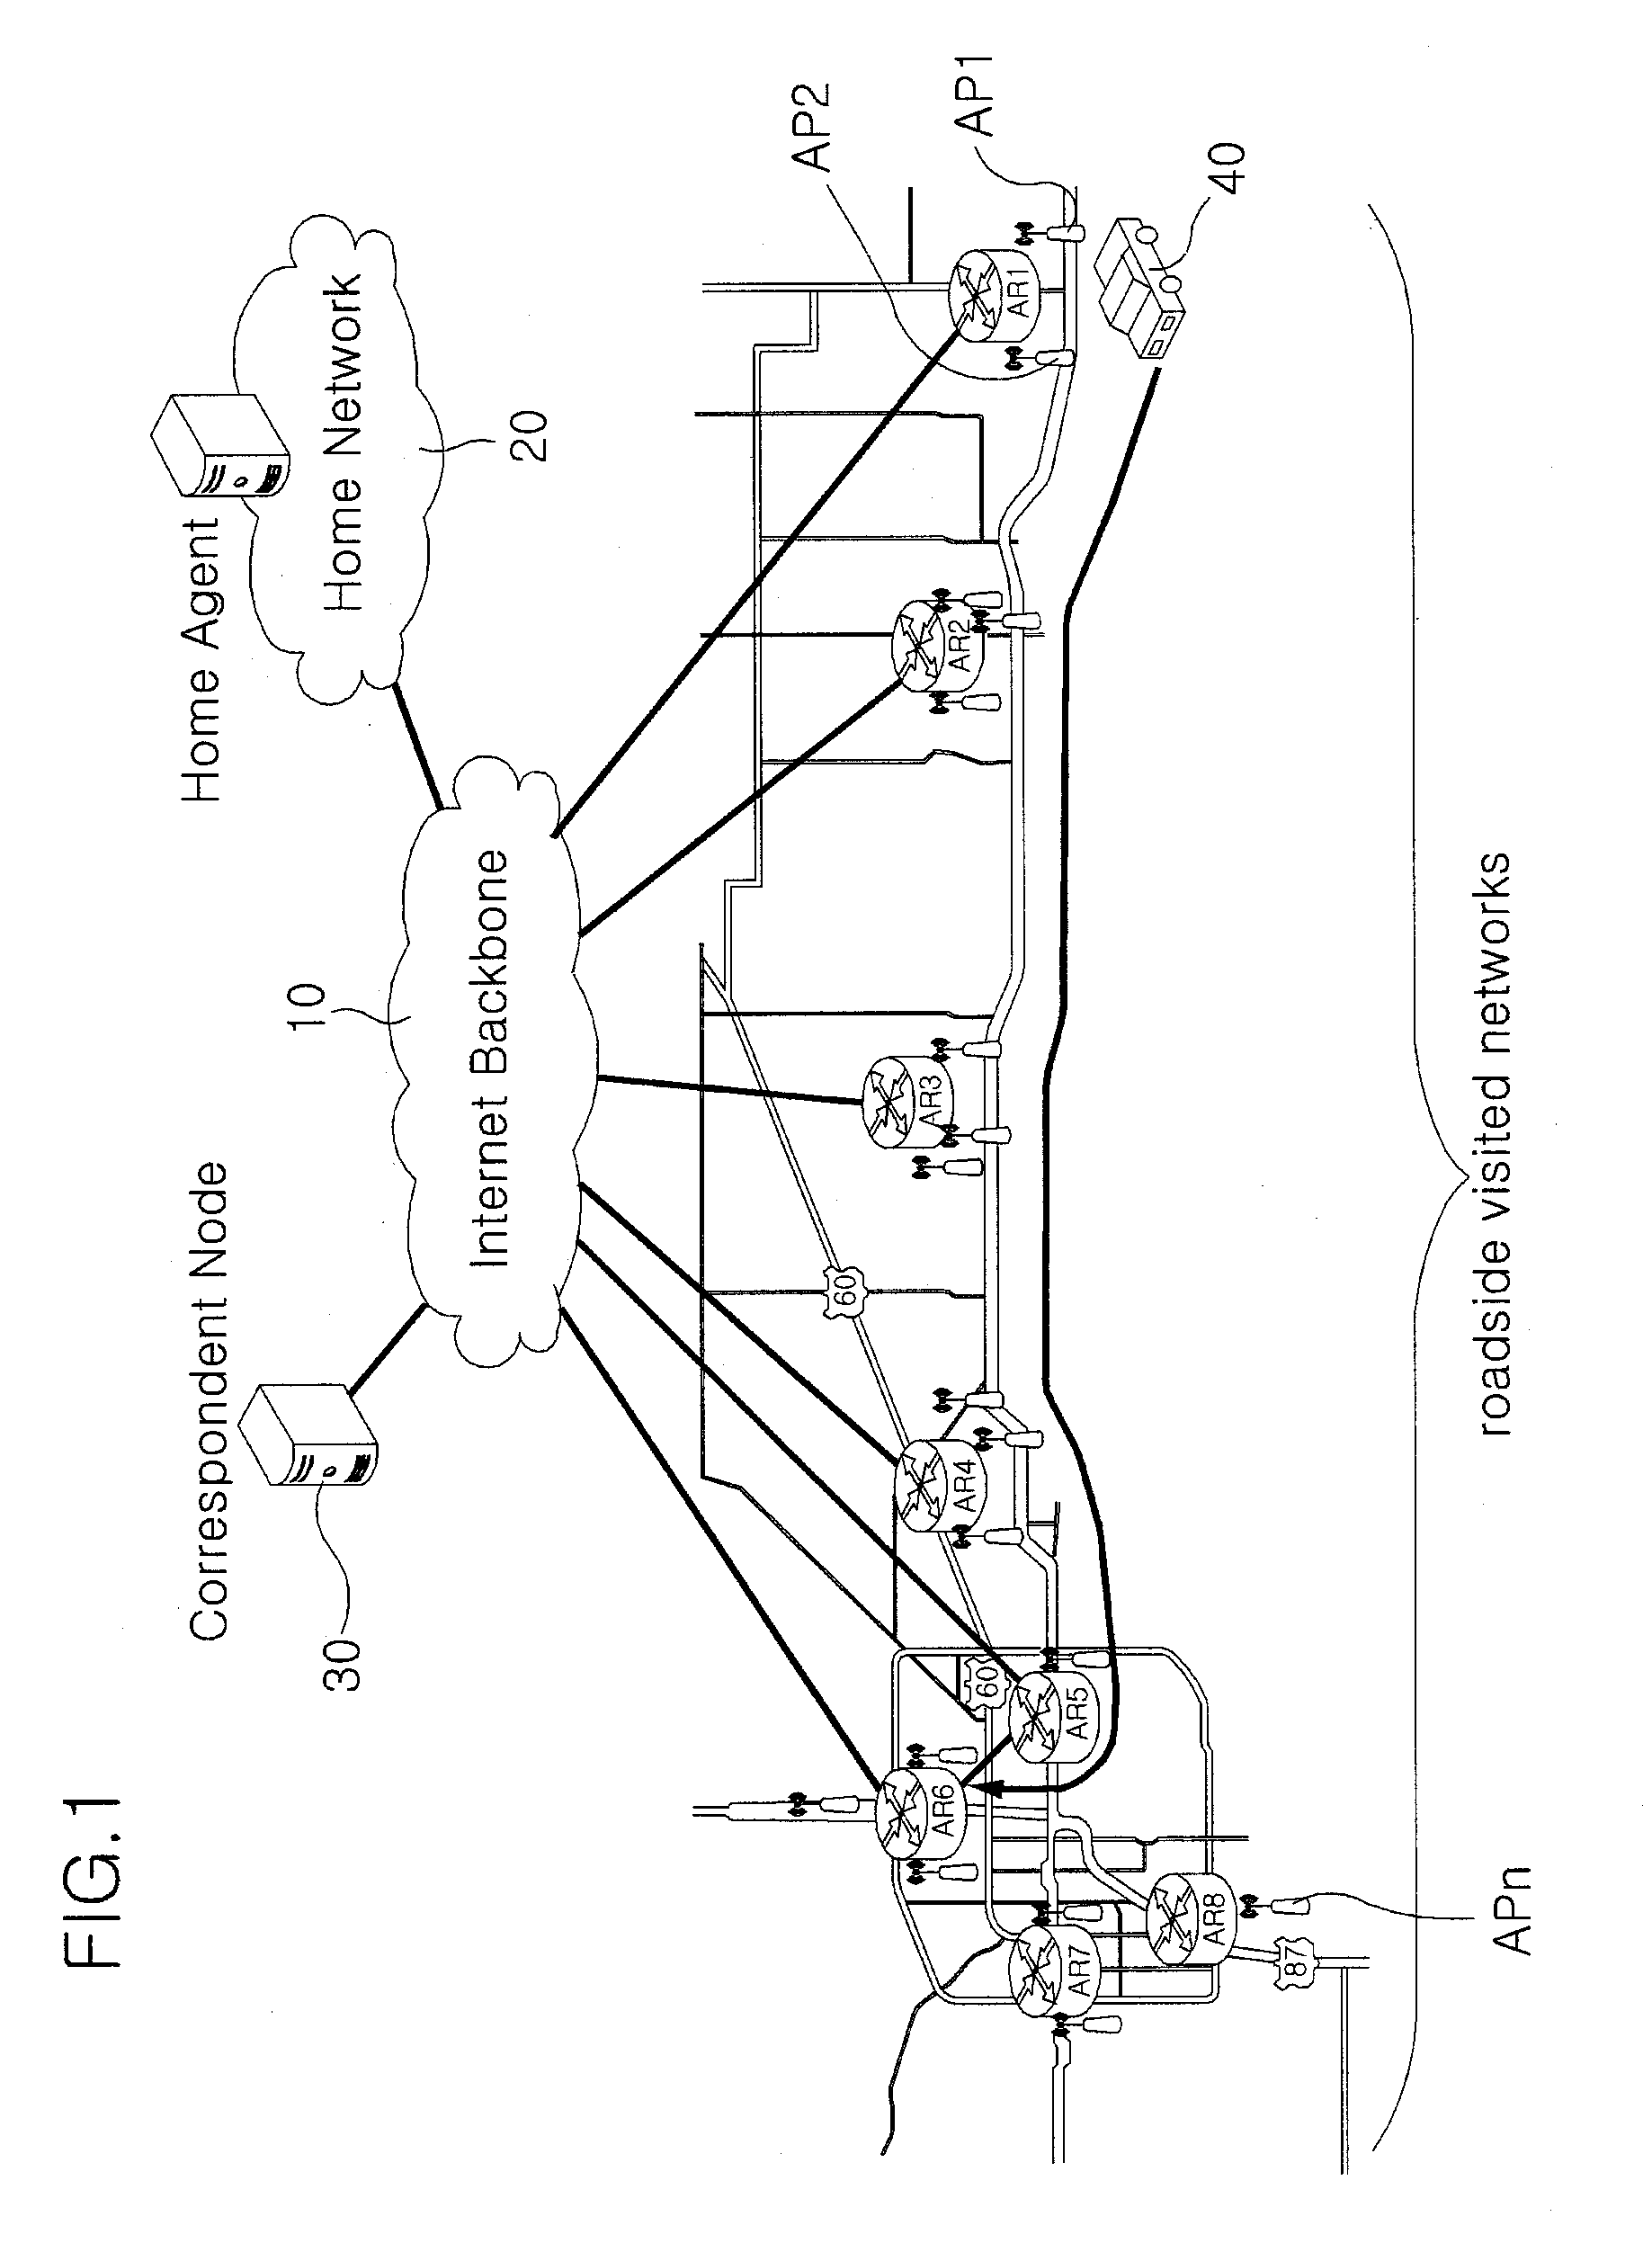 Method for lossless handover in vehicular wireless networks